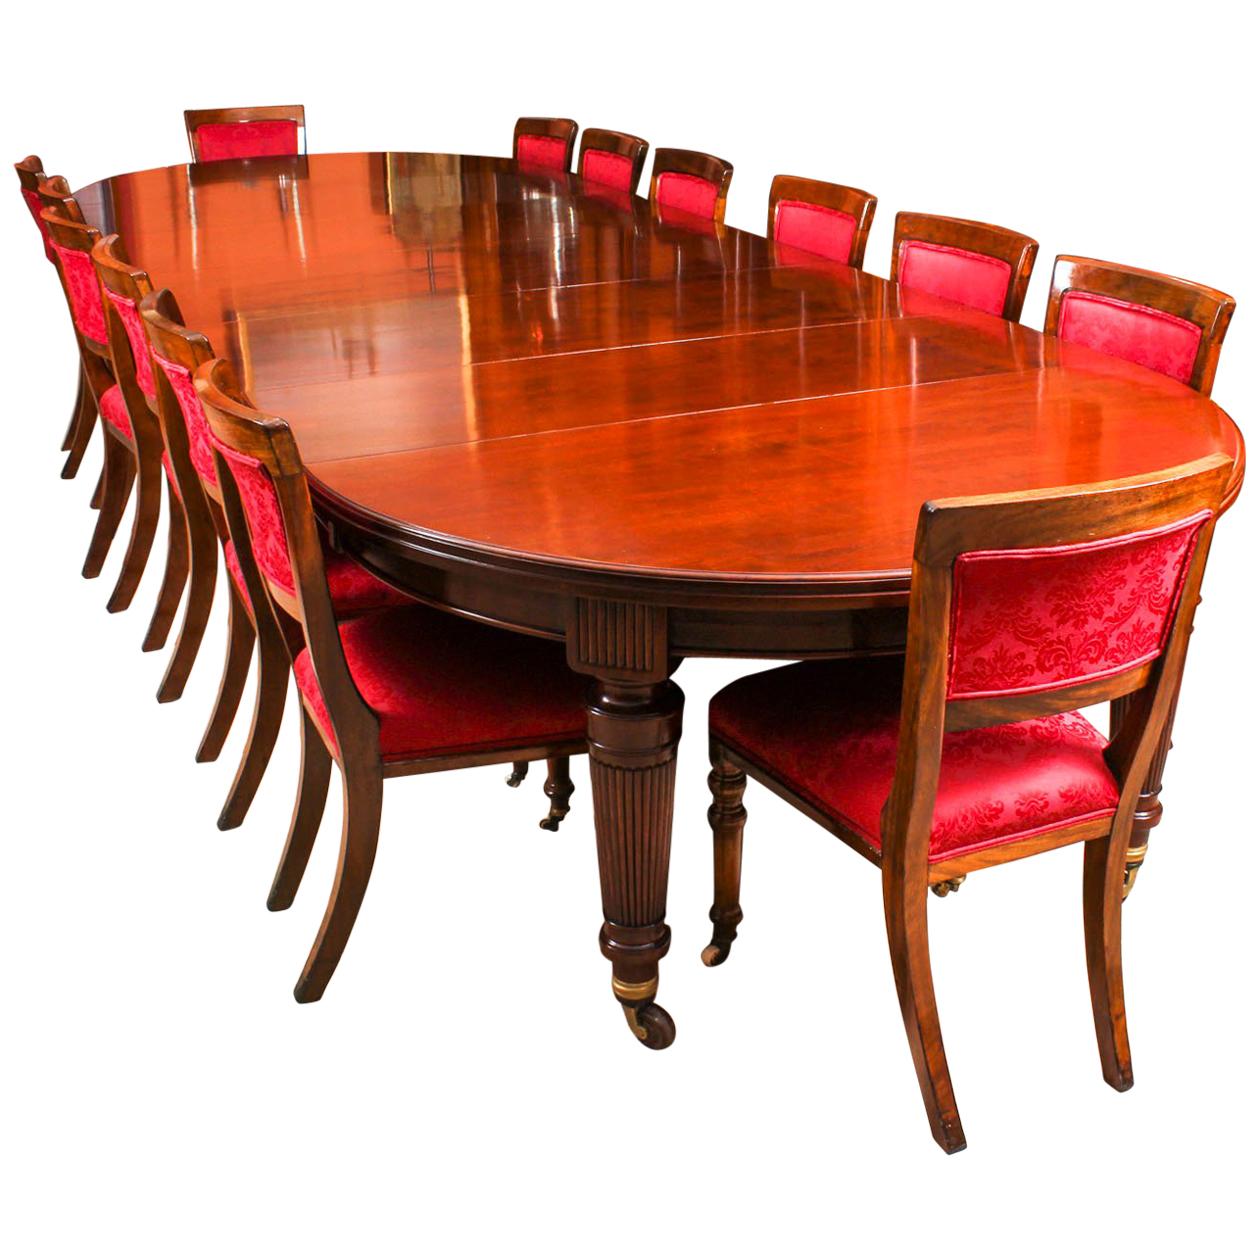 Antique Victorian Circular Extending Dining Table and 14 Chairs, 19th Century